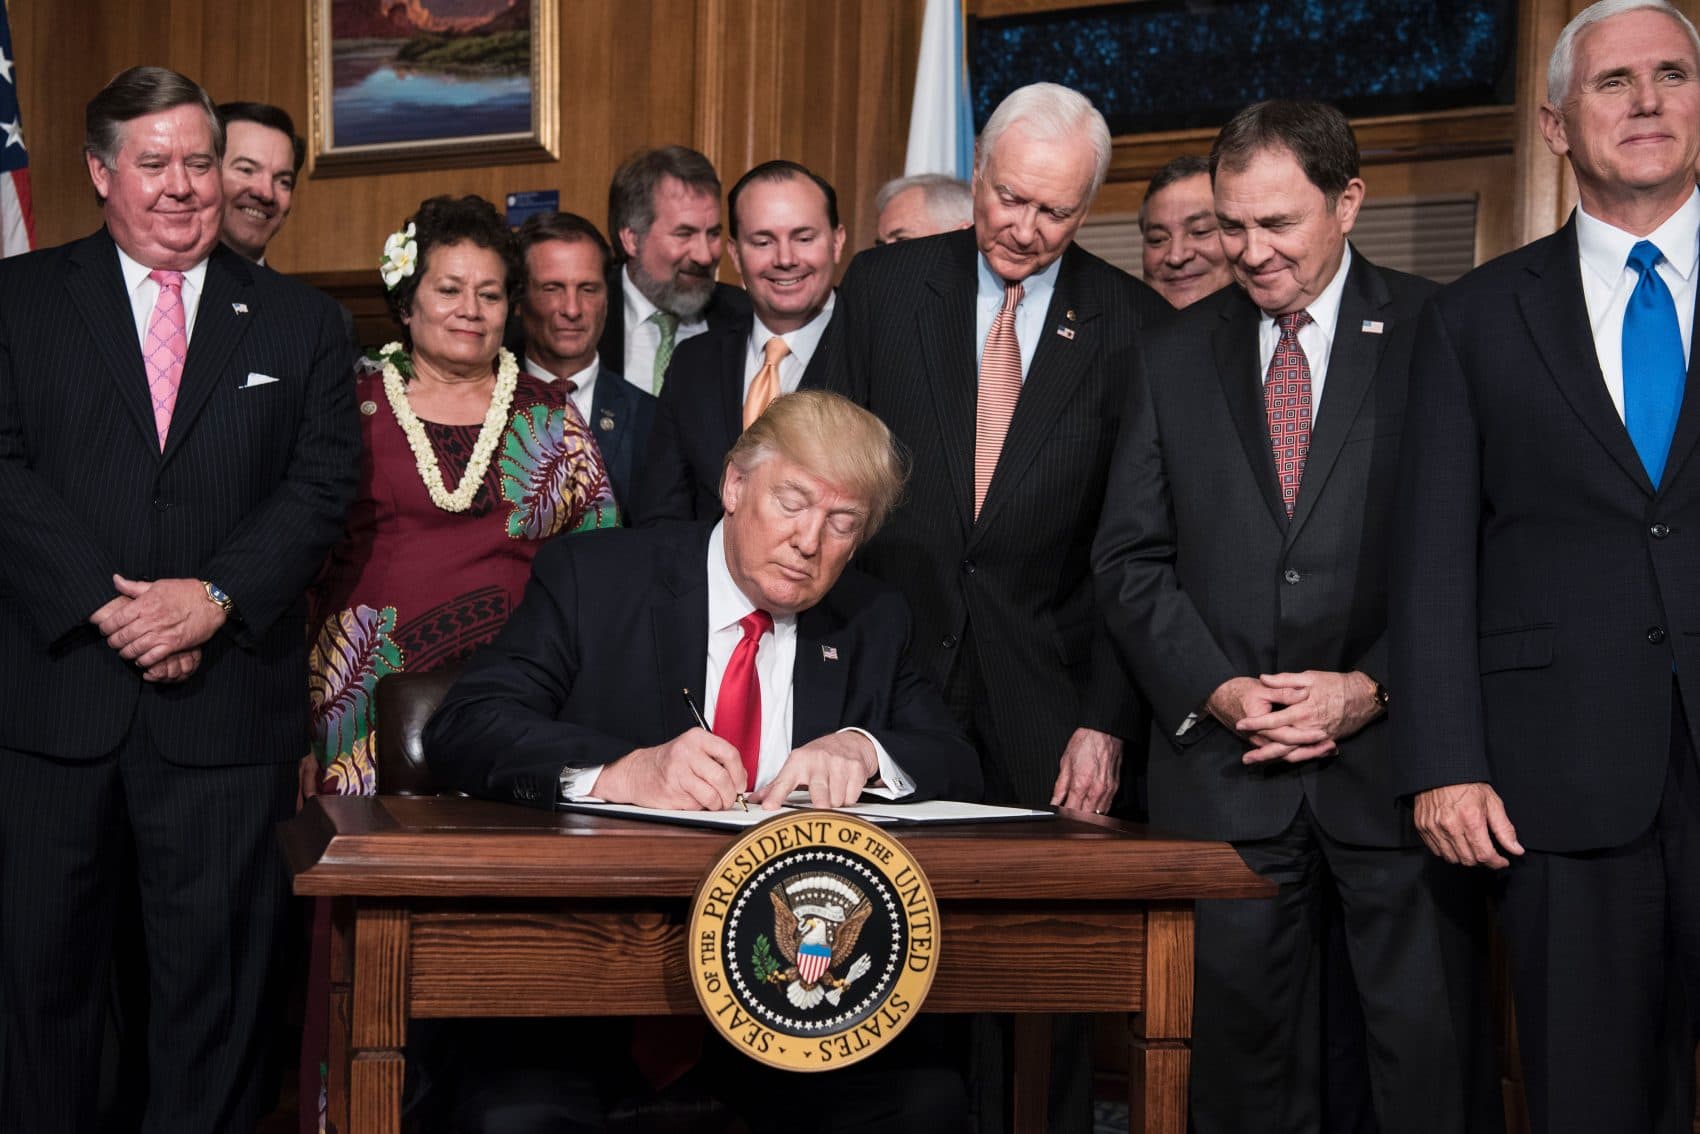 President Trump signs an executive order to review the Antiquities Act at the U.S. Department of the Interior on April 26, 2017 in Washington, D.C. (Brendan Smialowski/AFP/Getty Images)